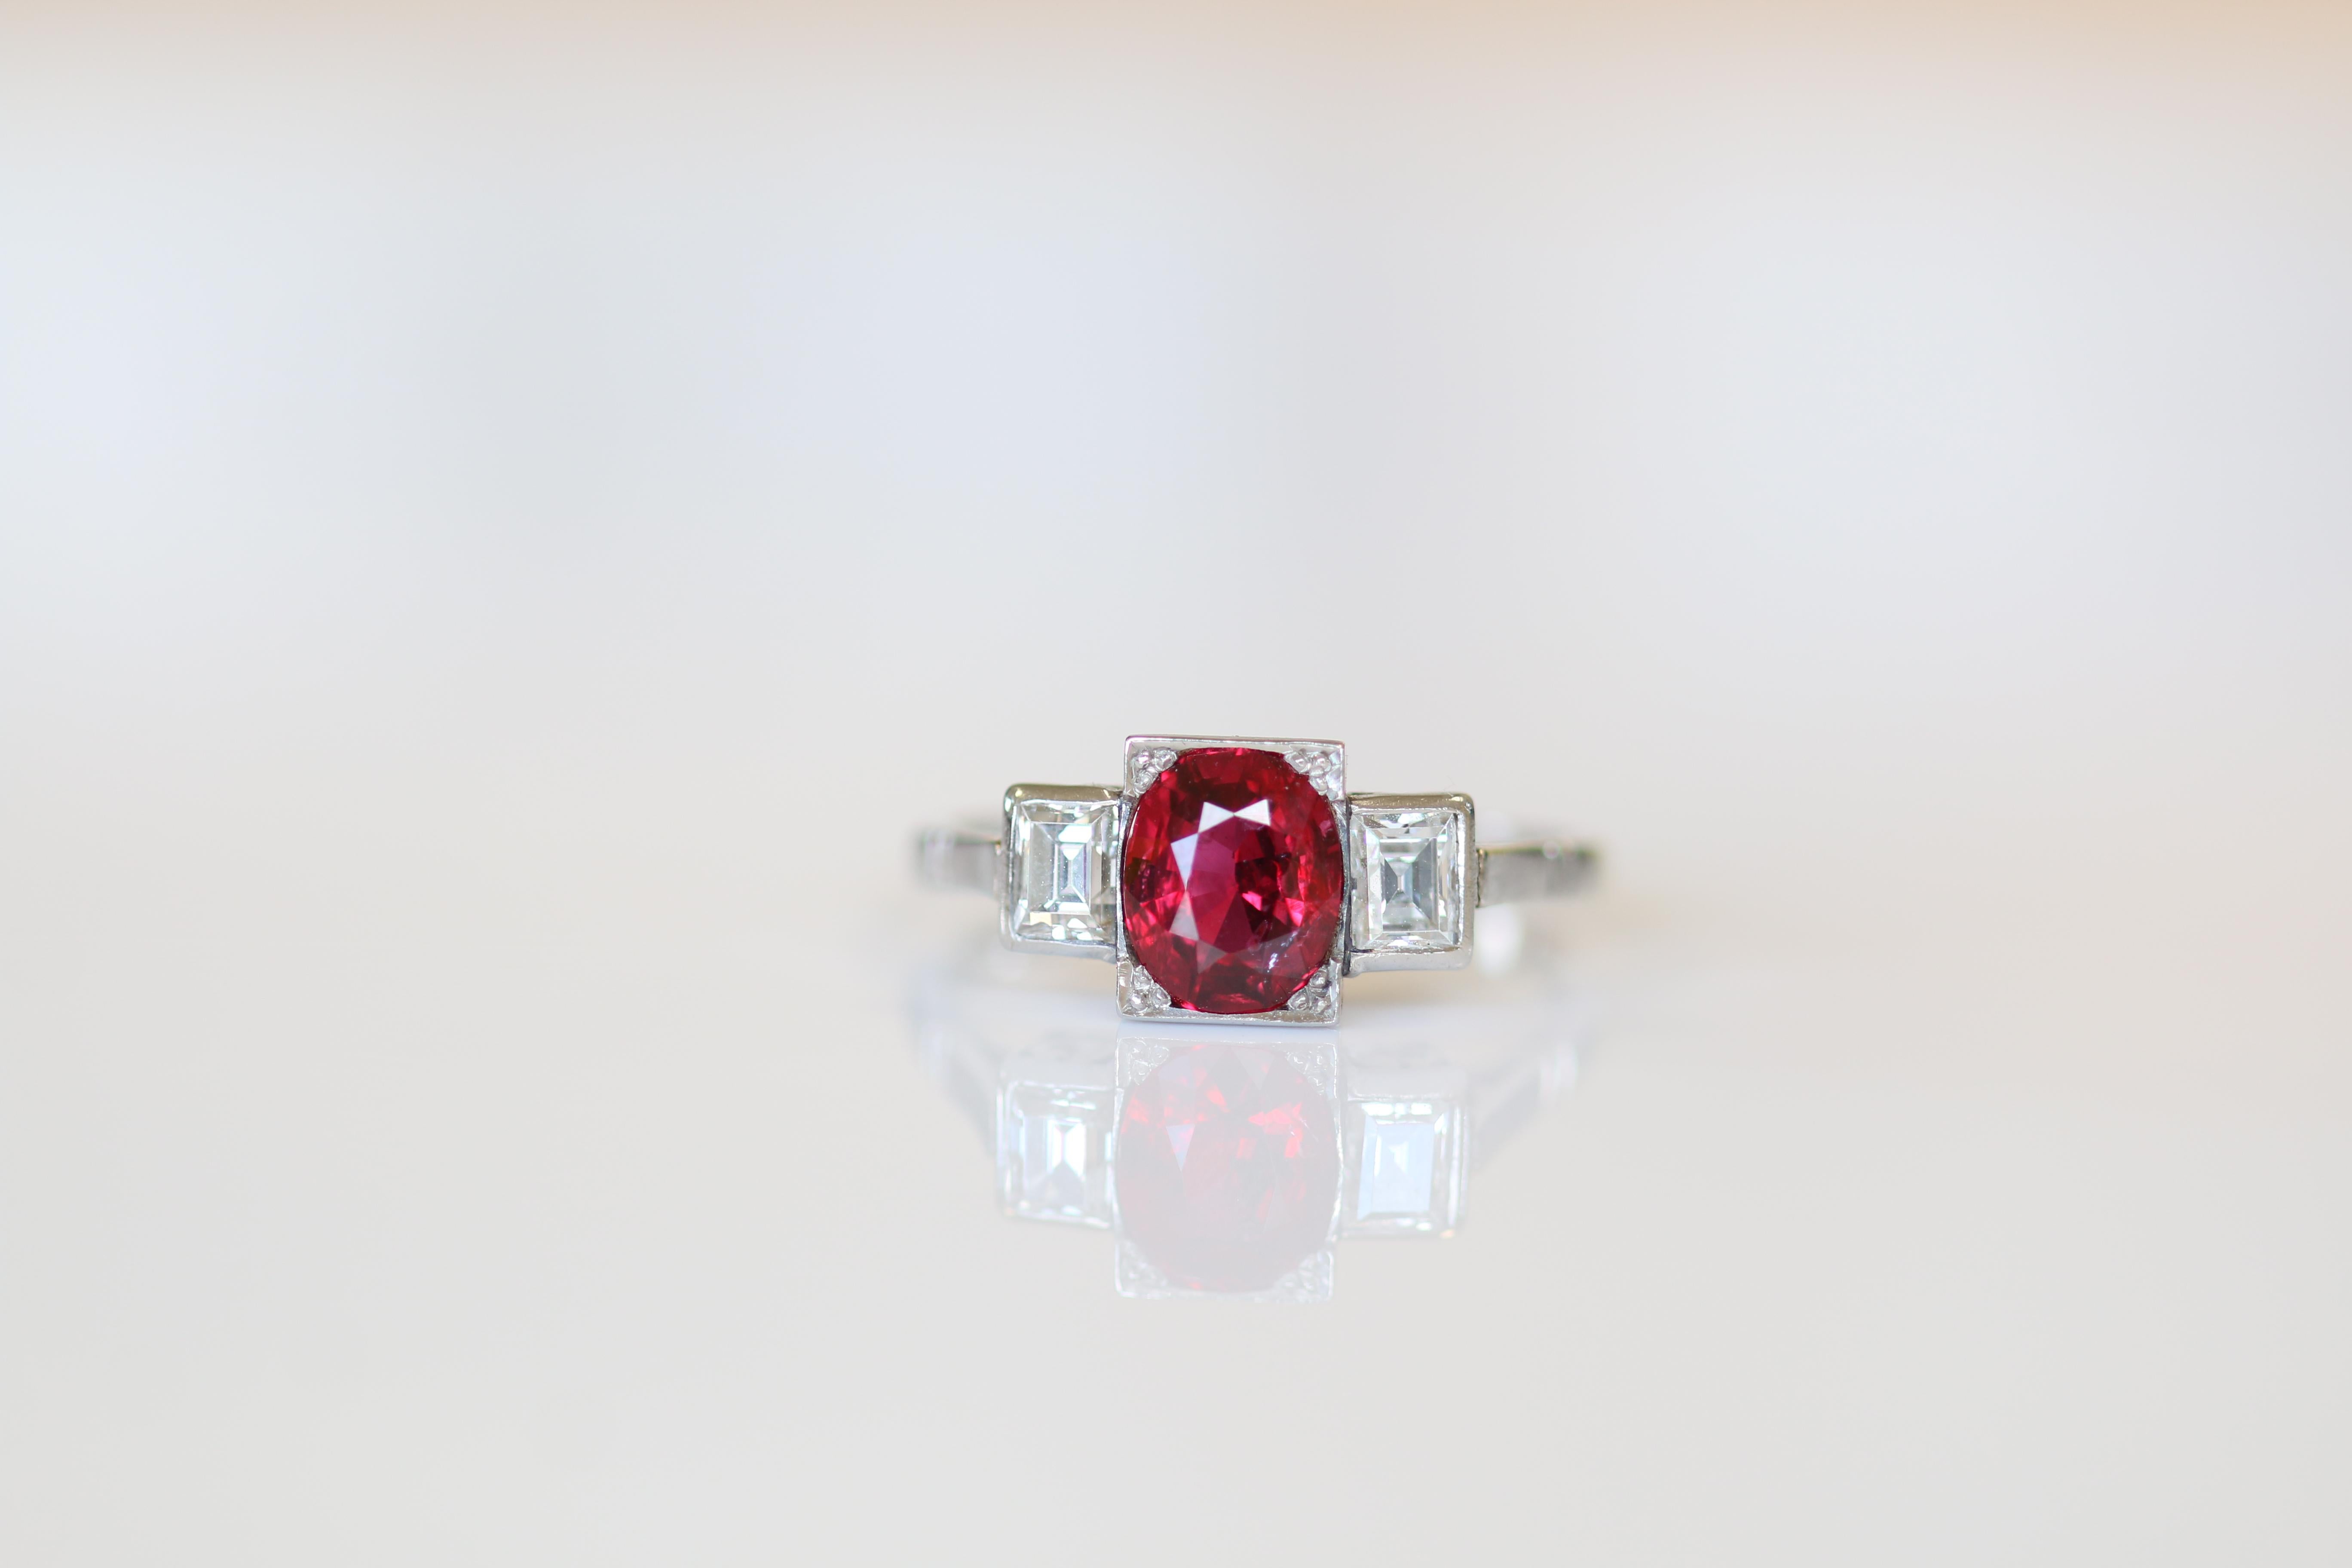 This fabulous Art Deco ruby and diamond three stone ring is sure to make an absolutely stunning engagement ring.  This ring is accompanied by a certificate from GCS stating the ruby is from Mozambique and has “no indications of heating”

This ring